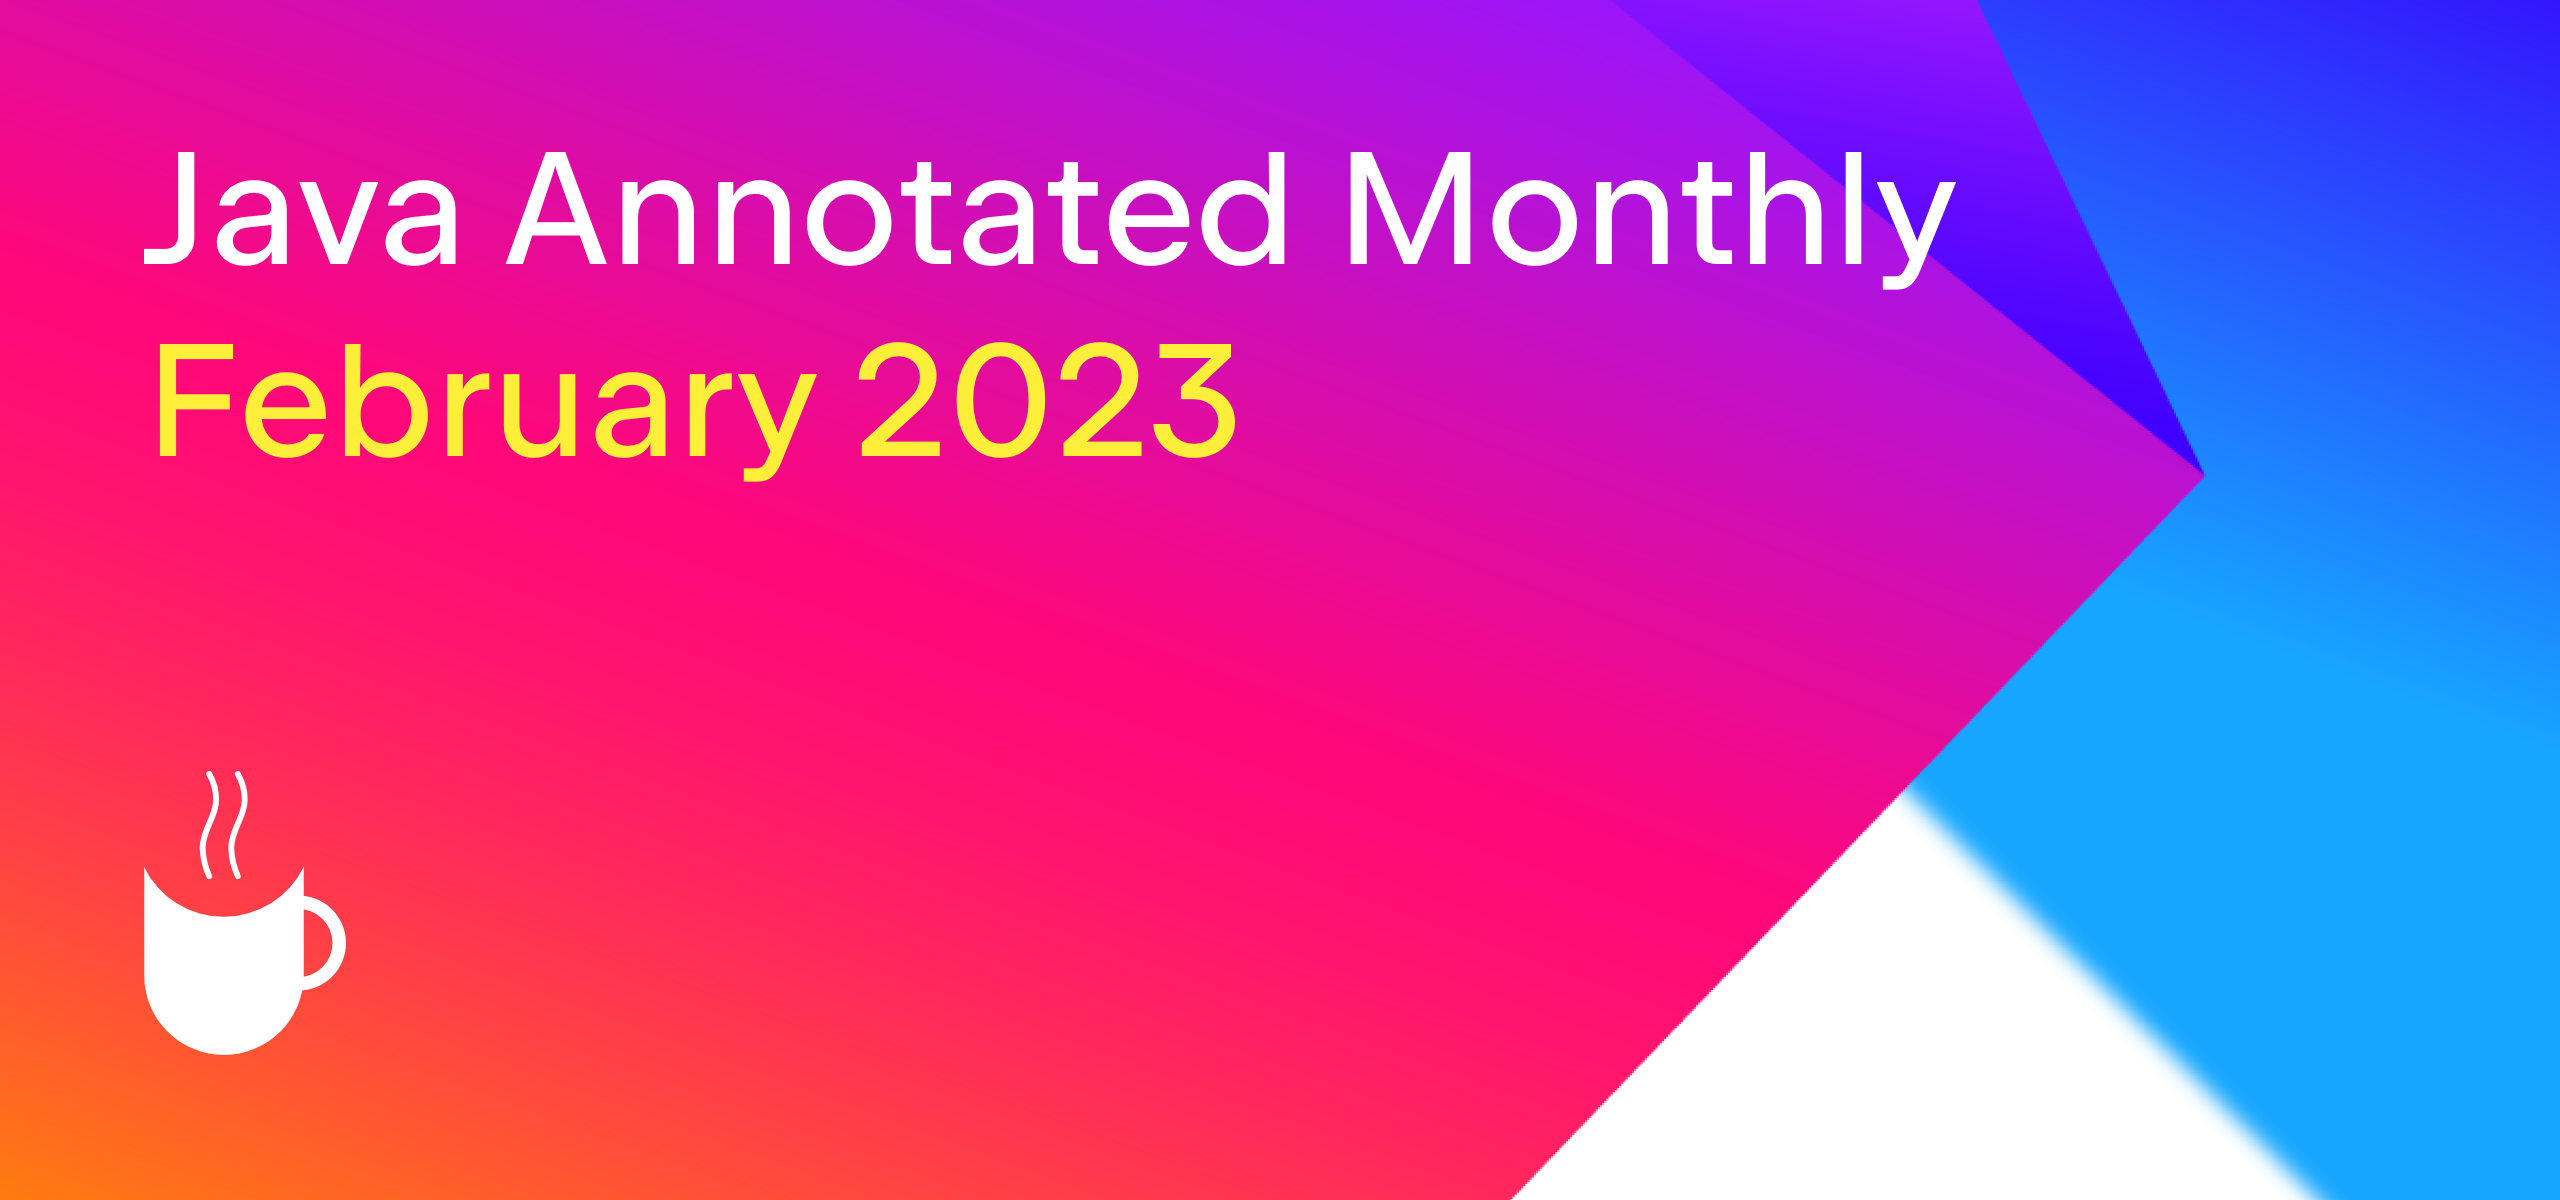 Java Annotated Monthly February 2023